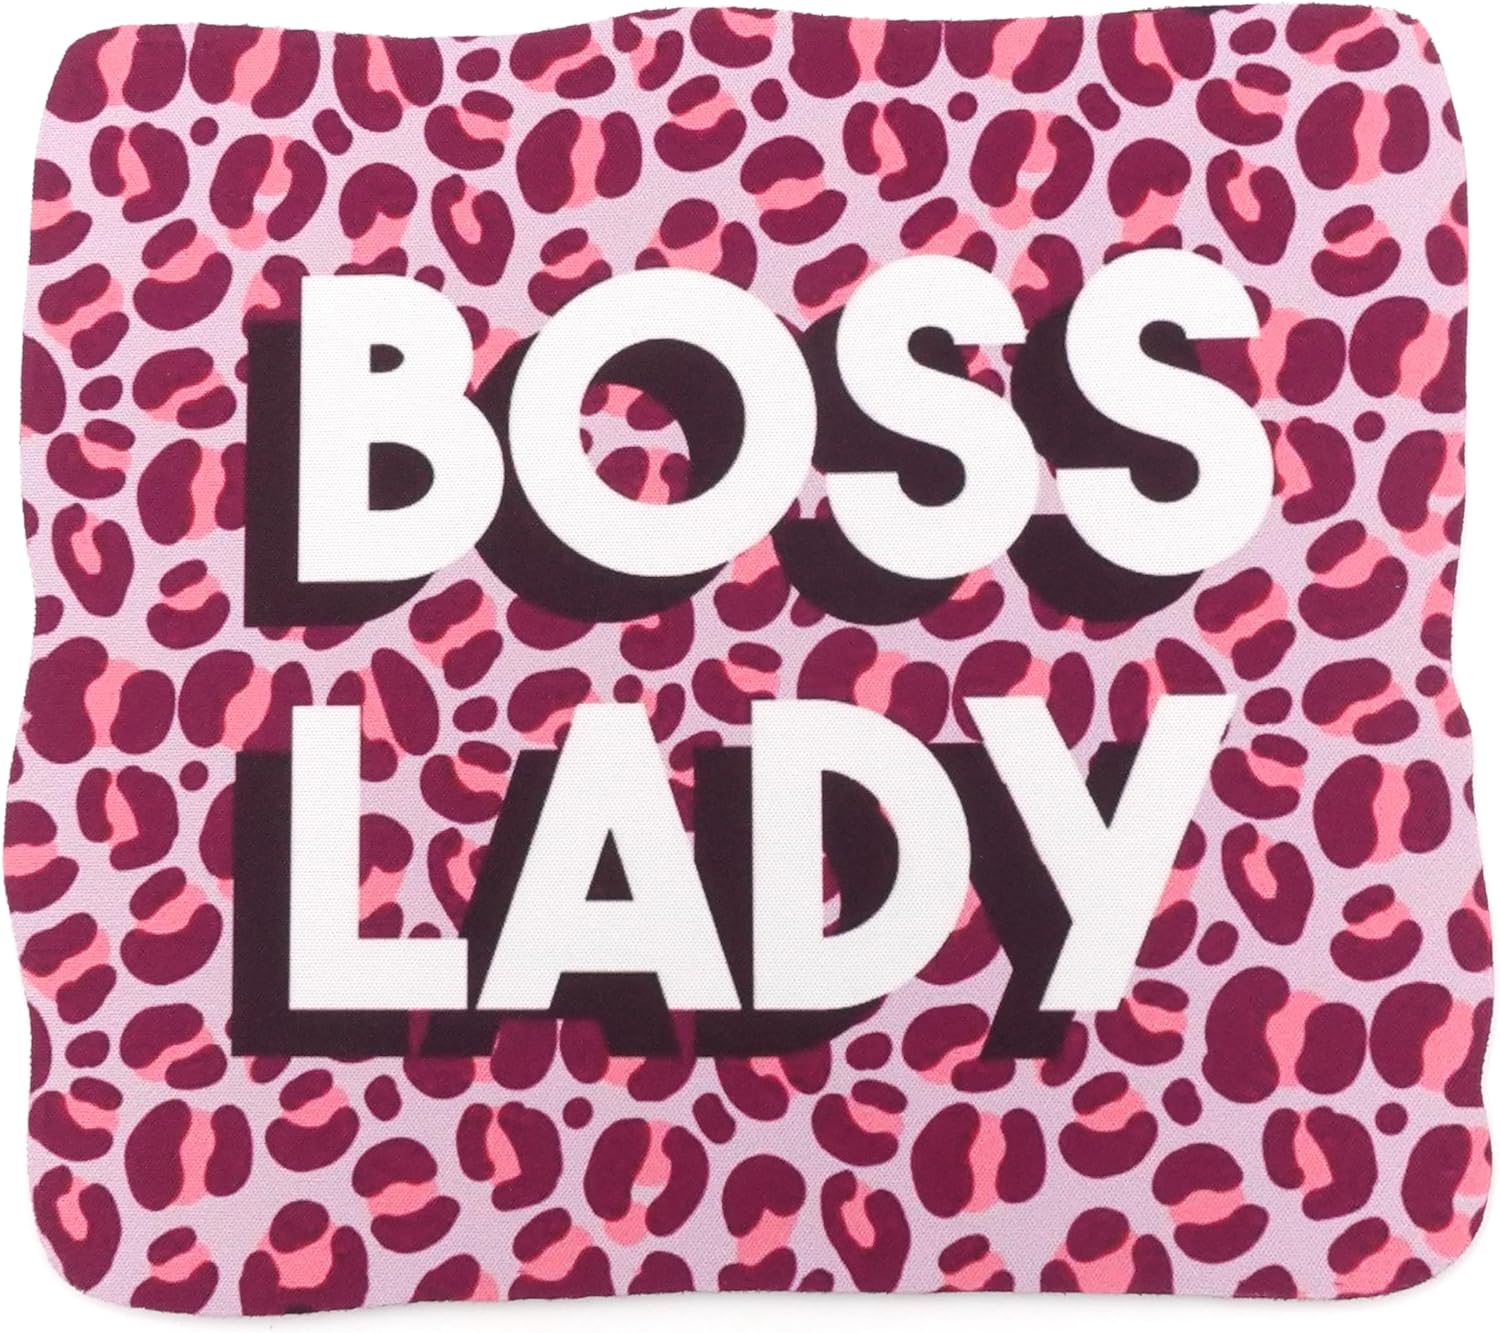 Boss Lady Mouse pad, Non-Slip Rubber Mouse Mat for Desk and Laptop Computer